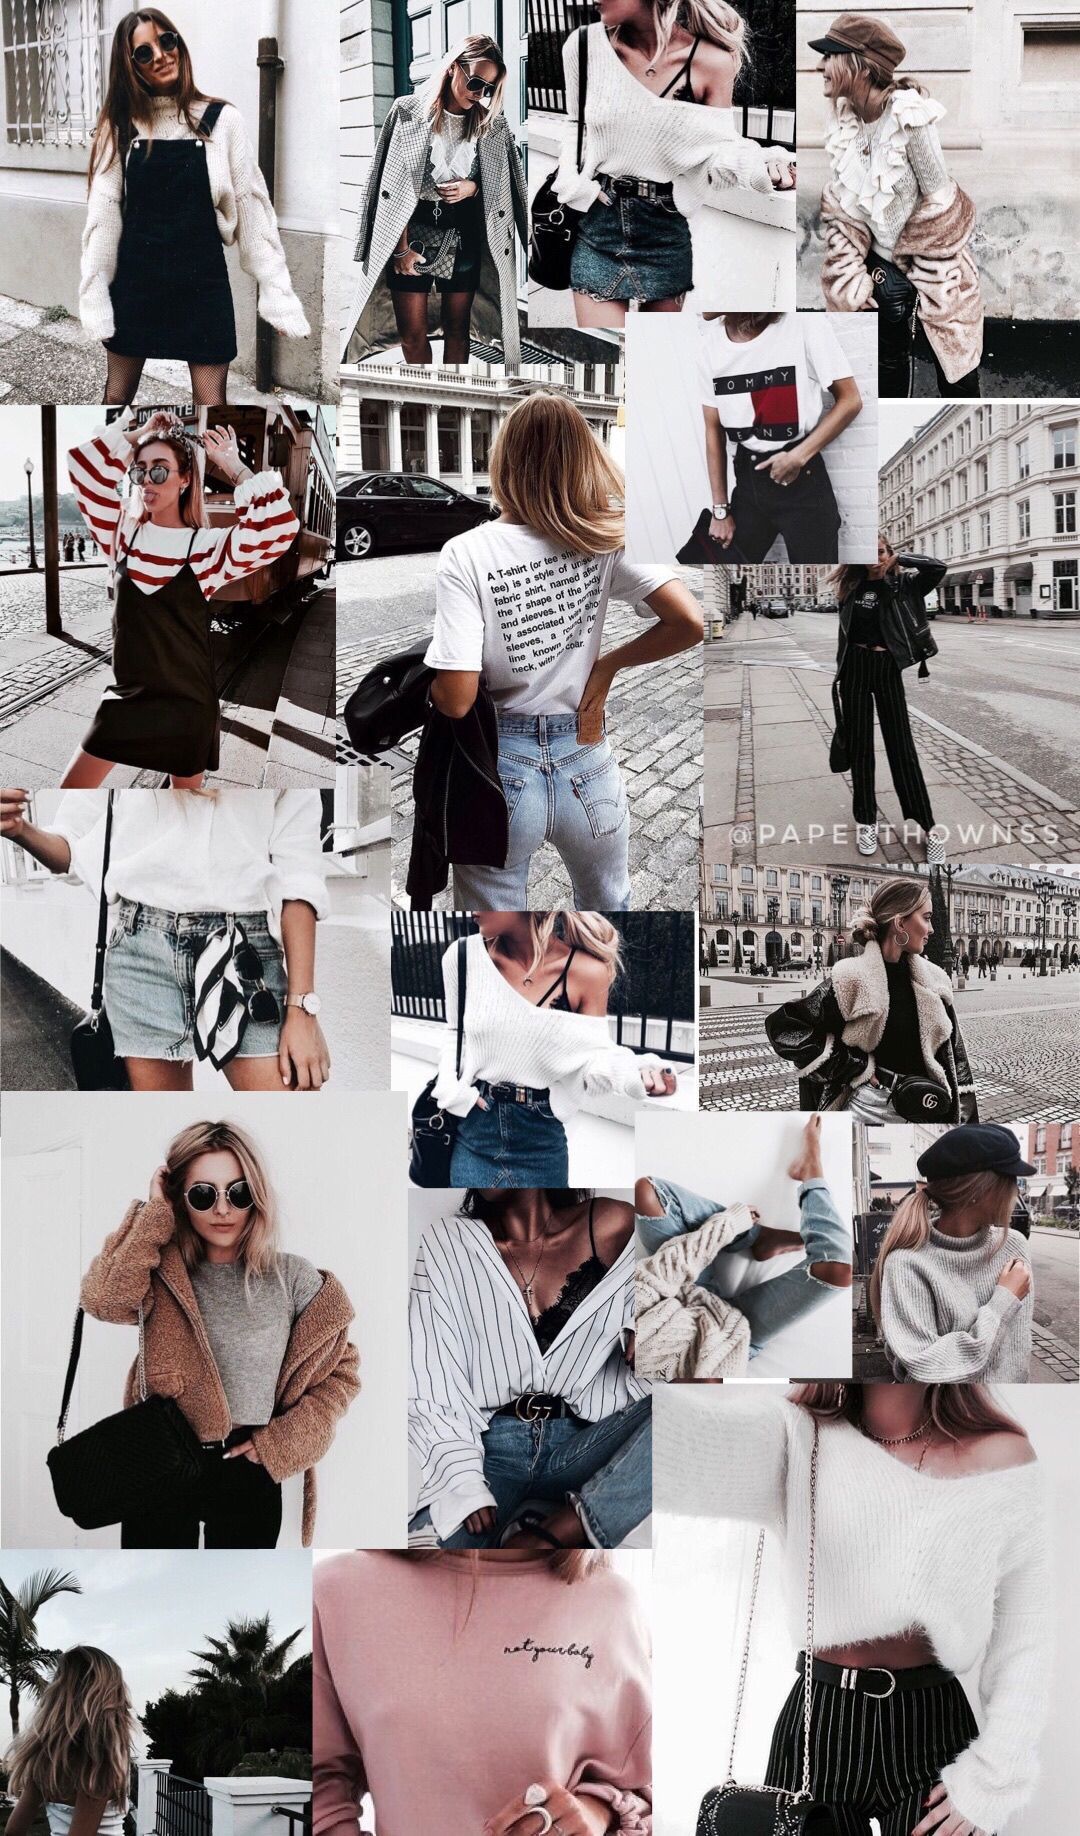 Aesthetic Outfits Wallpaper Free .wallpaperaccess.com